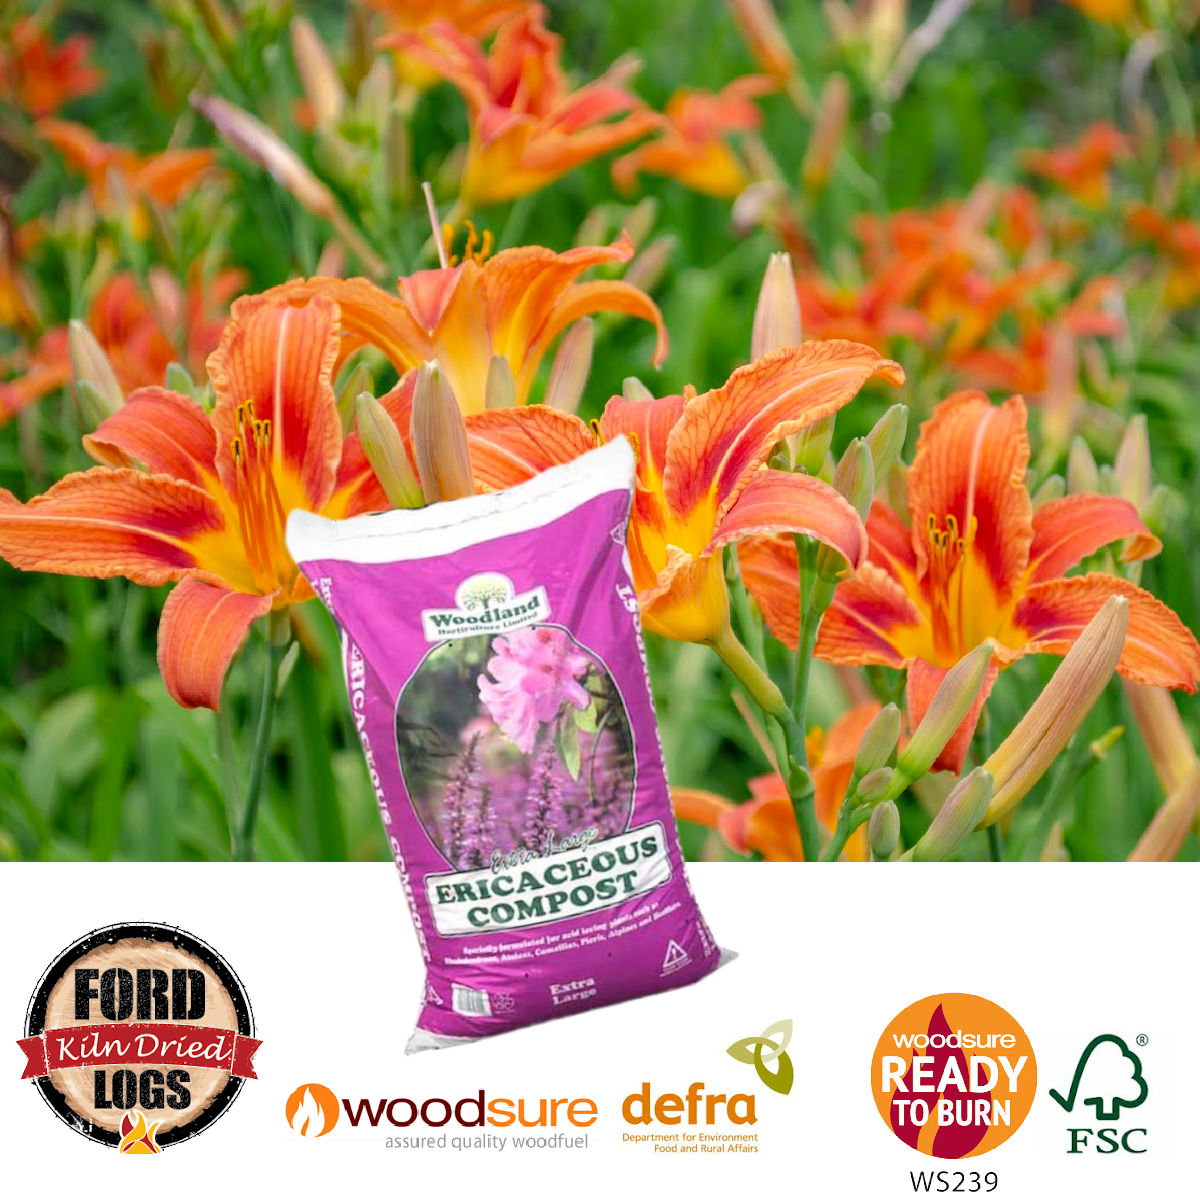 Ericaceous Compost is specially created to get the best out of acid-loving plants such as Azaleas, Camellias, Rhododendrons, Pieris, Heathers and Alpines 🌺

We supply in 60 litre bags or in .75m³ bulk bags £7 per bag

#fordlogs #ericaceouscompost
fordlogs.co.uk/produc.../eric…